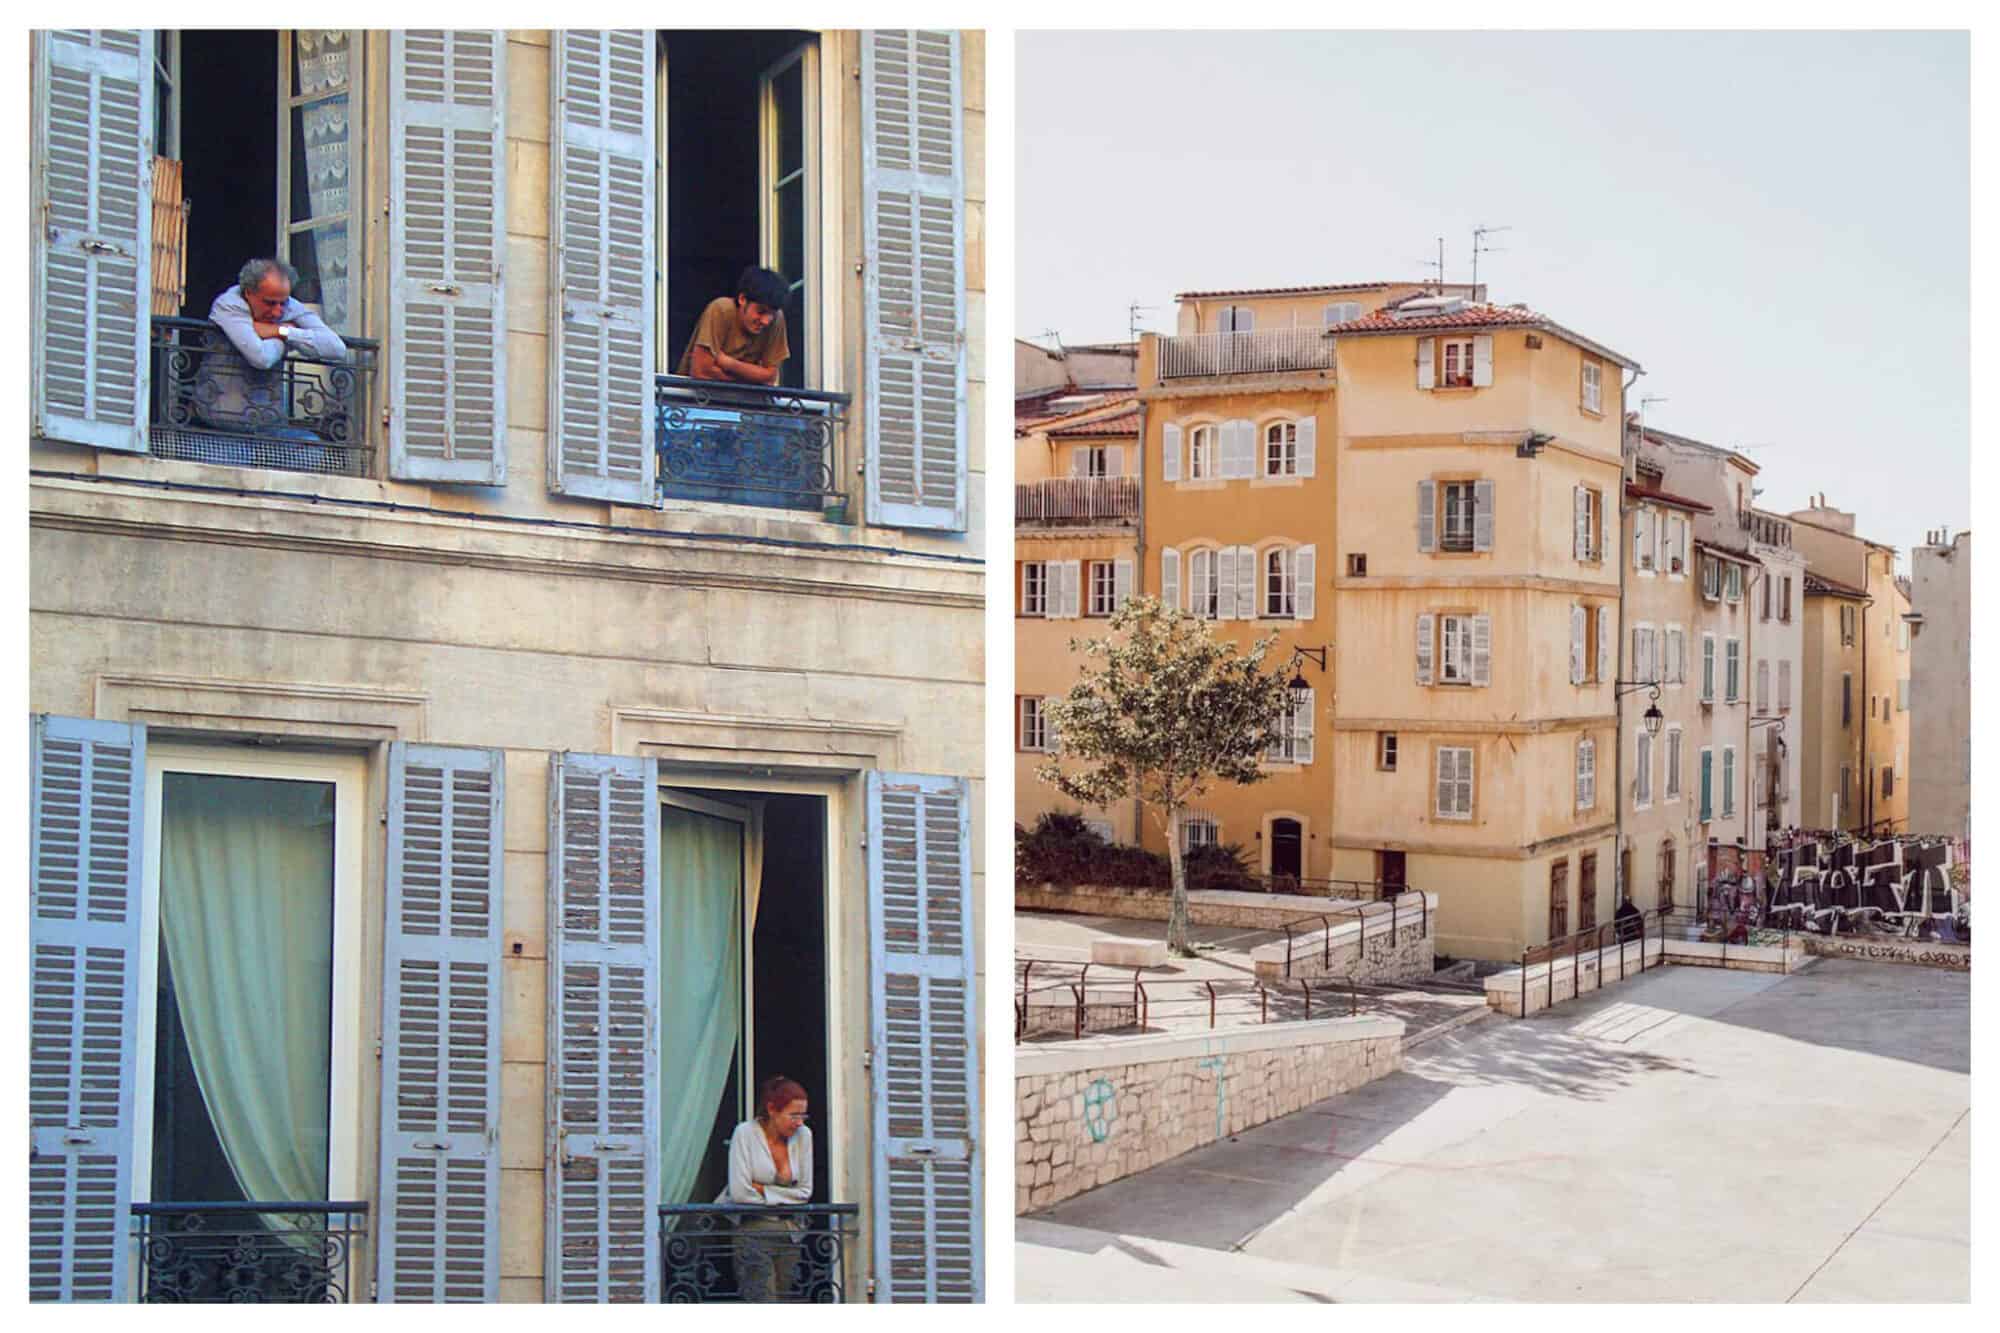 Left: Marseille residents stand at that their window sills people watching the scenes below
Right: Buildings in a village in the South of France